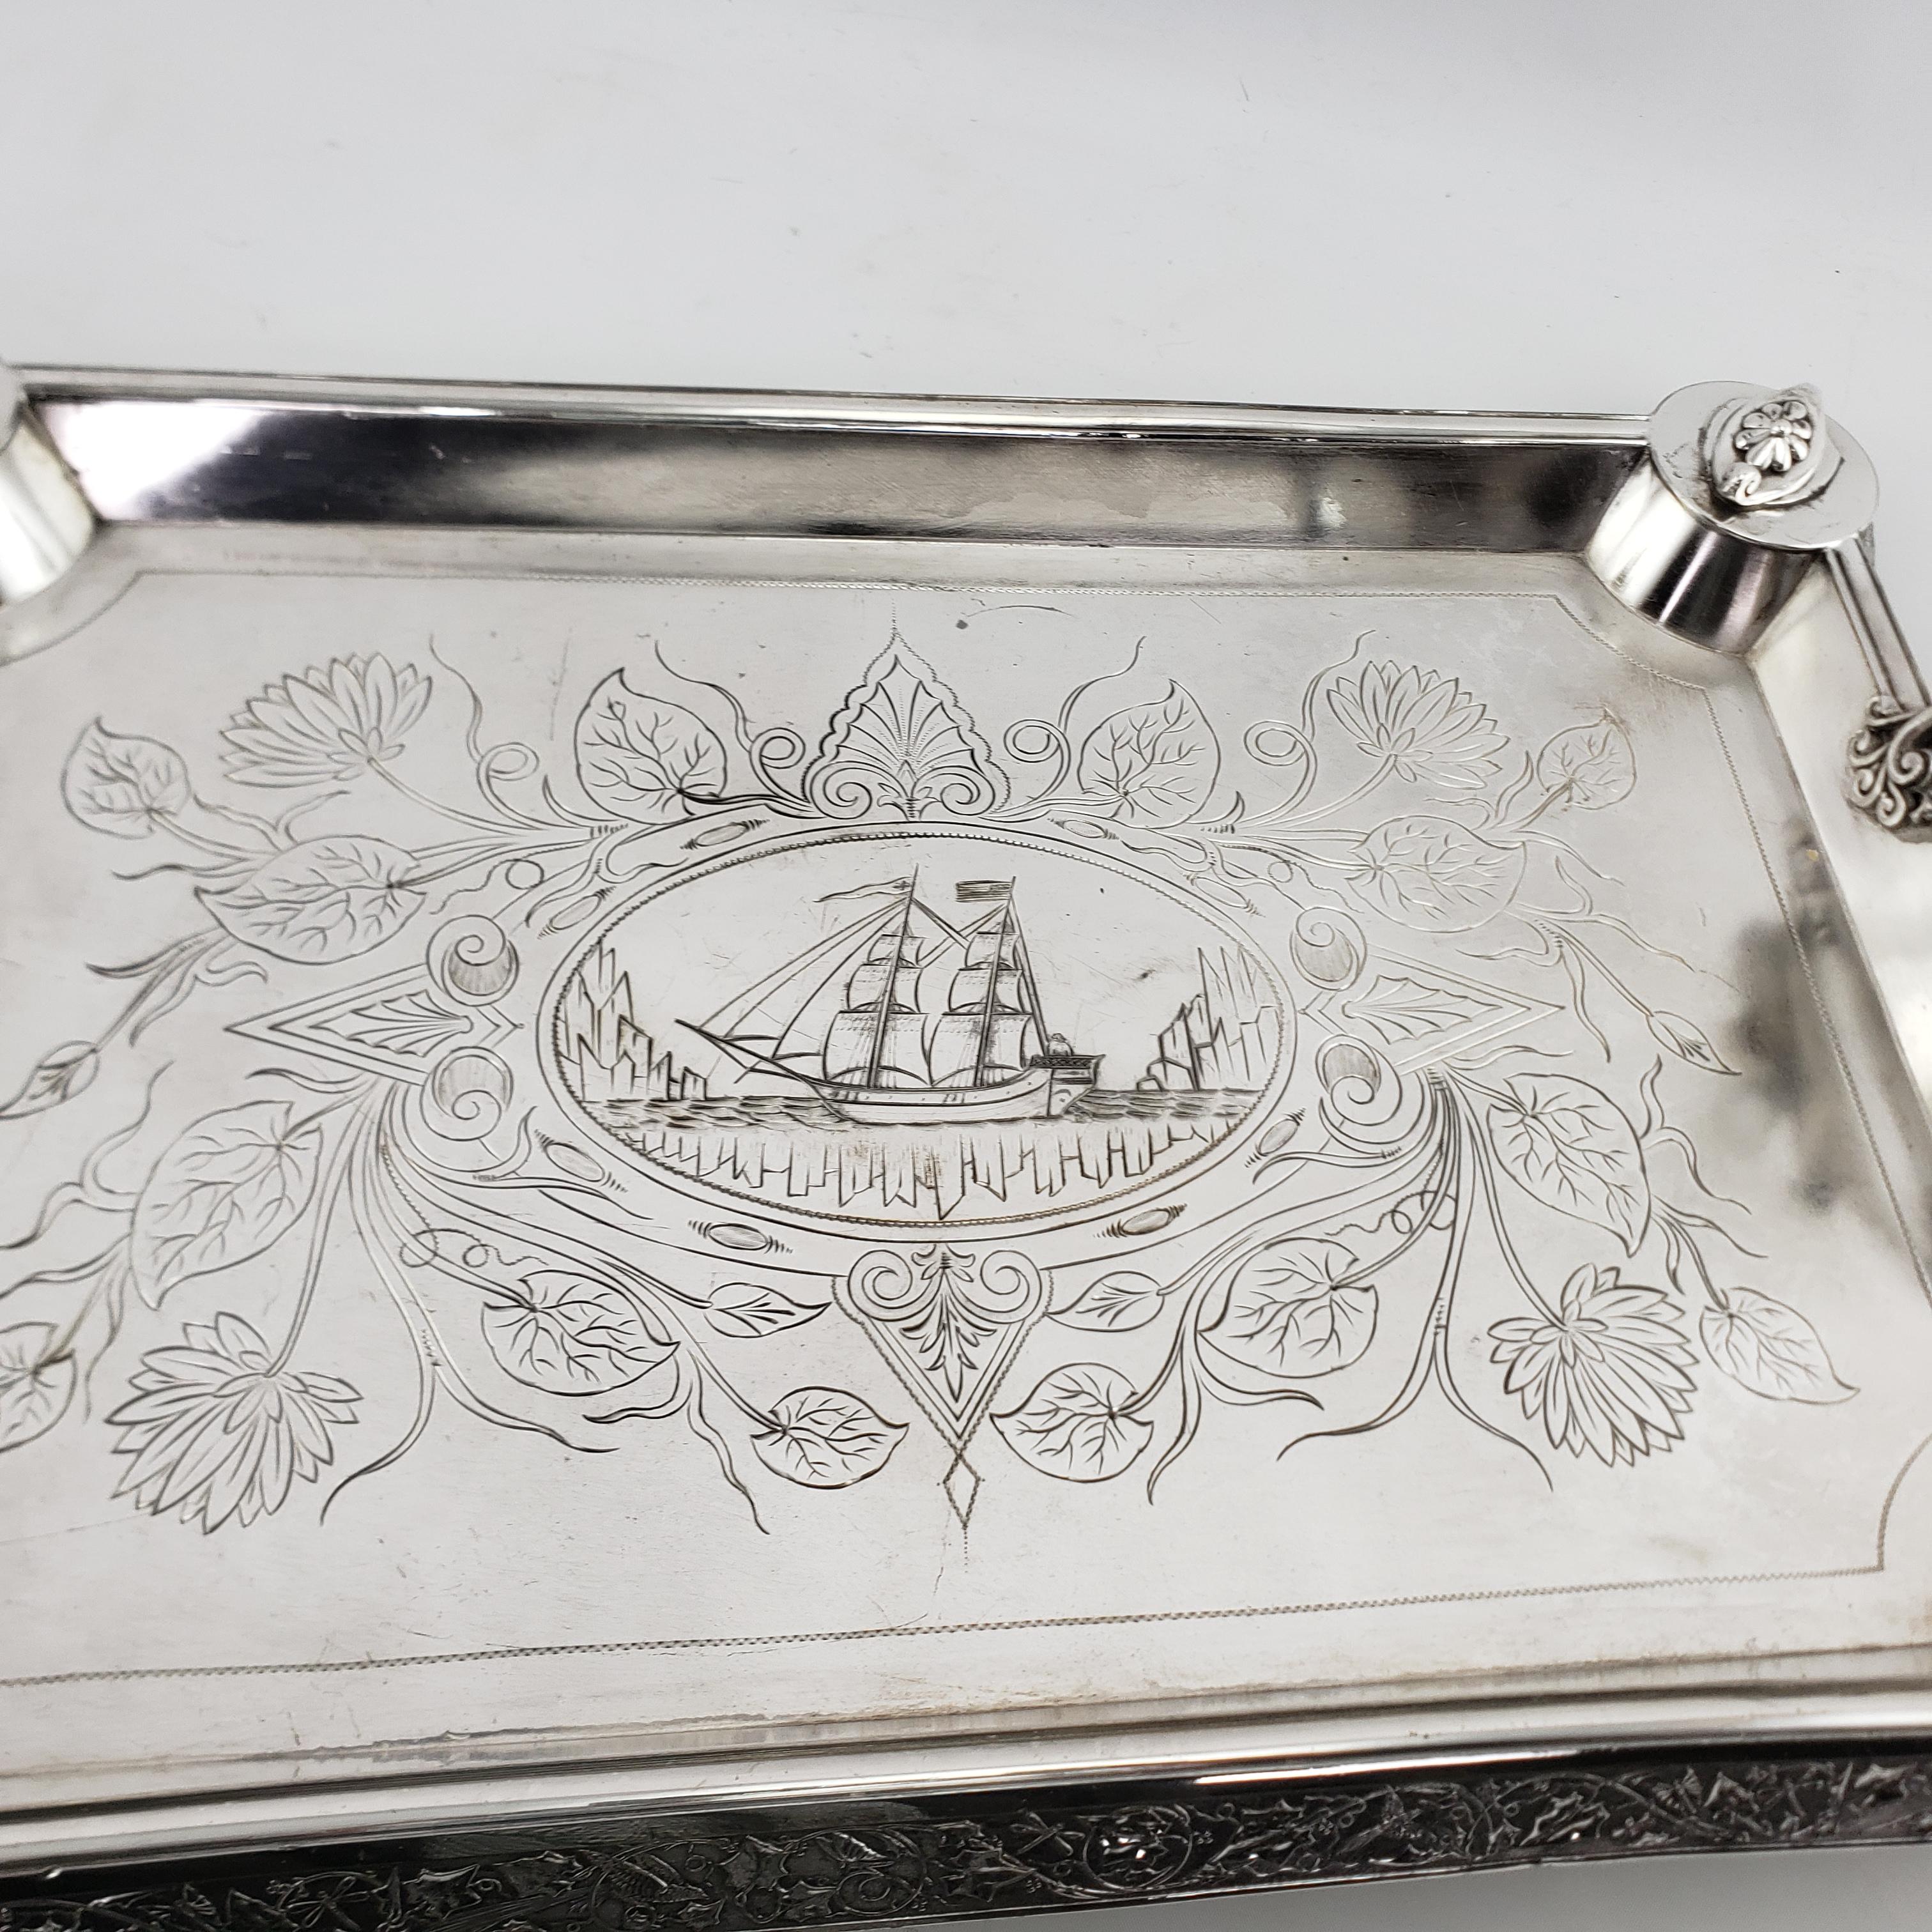 Antique Aesthetic Movement Silver Plated Serving Tray with Figural Siren Handles For Sale 4